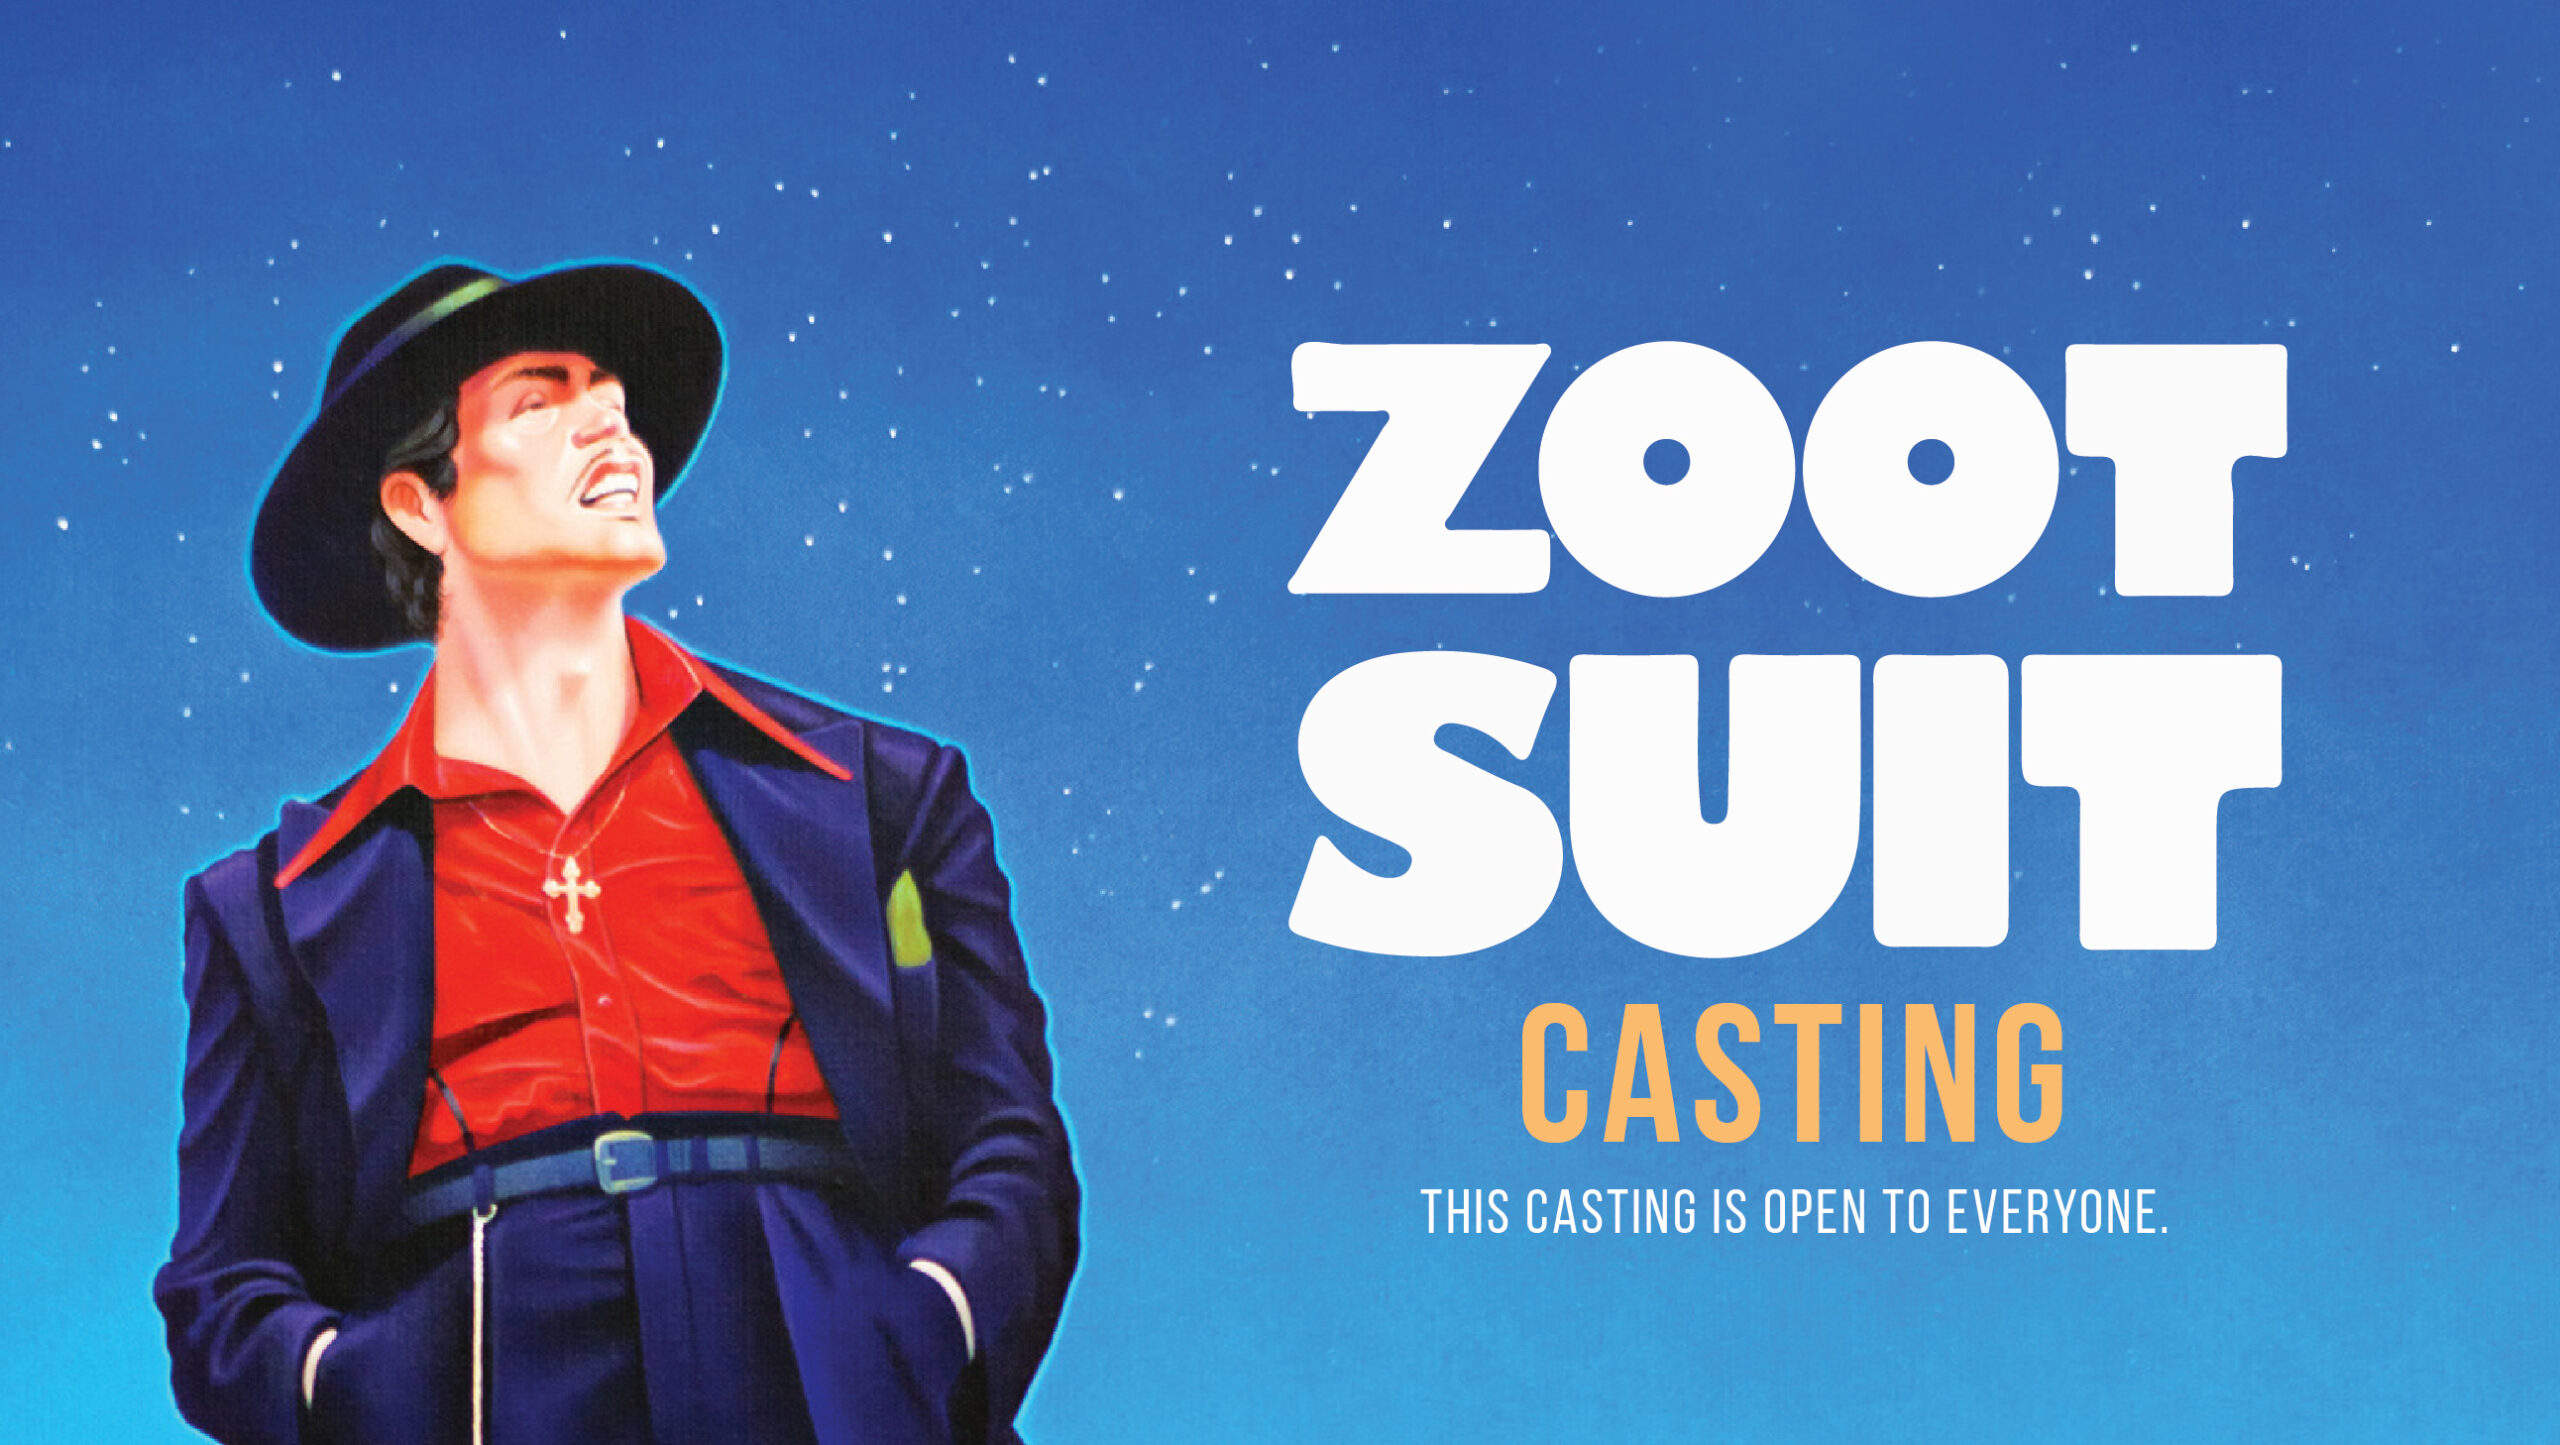 Casting for Zoot Suit